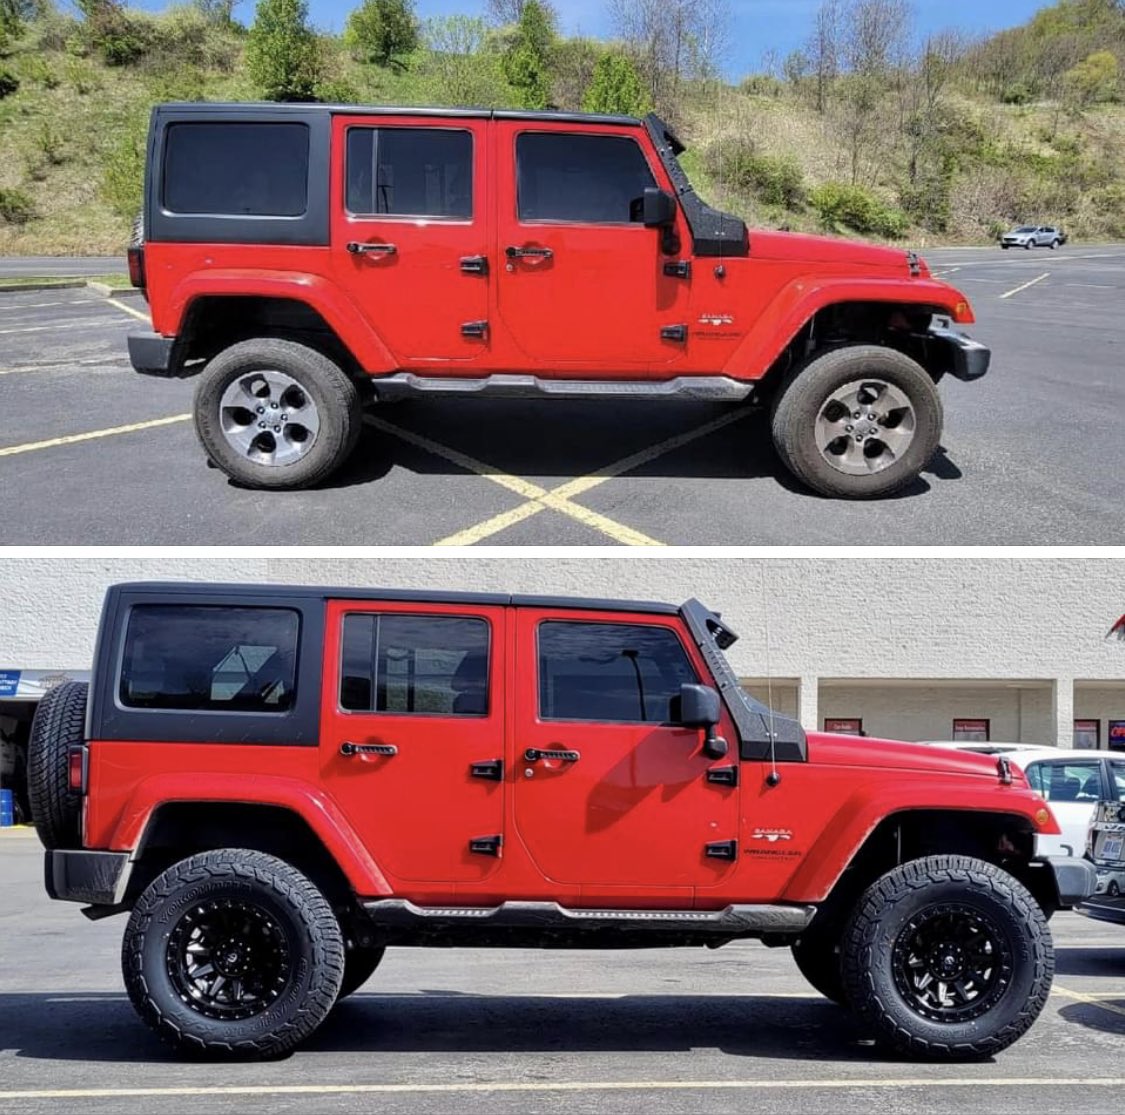 WOW! WOW! What a difference! 4”@roughcountry suspension lift made room for 35x12.50r18 @YokohamaTC Tires mounted on 18x9 @FuelOffroad Coverts with a -12 offset. The all black wheels were the perfect match. #WHEELKINGS #jeep #jeeplife #304jeepers #jeepwheels